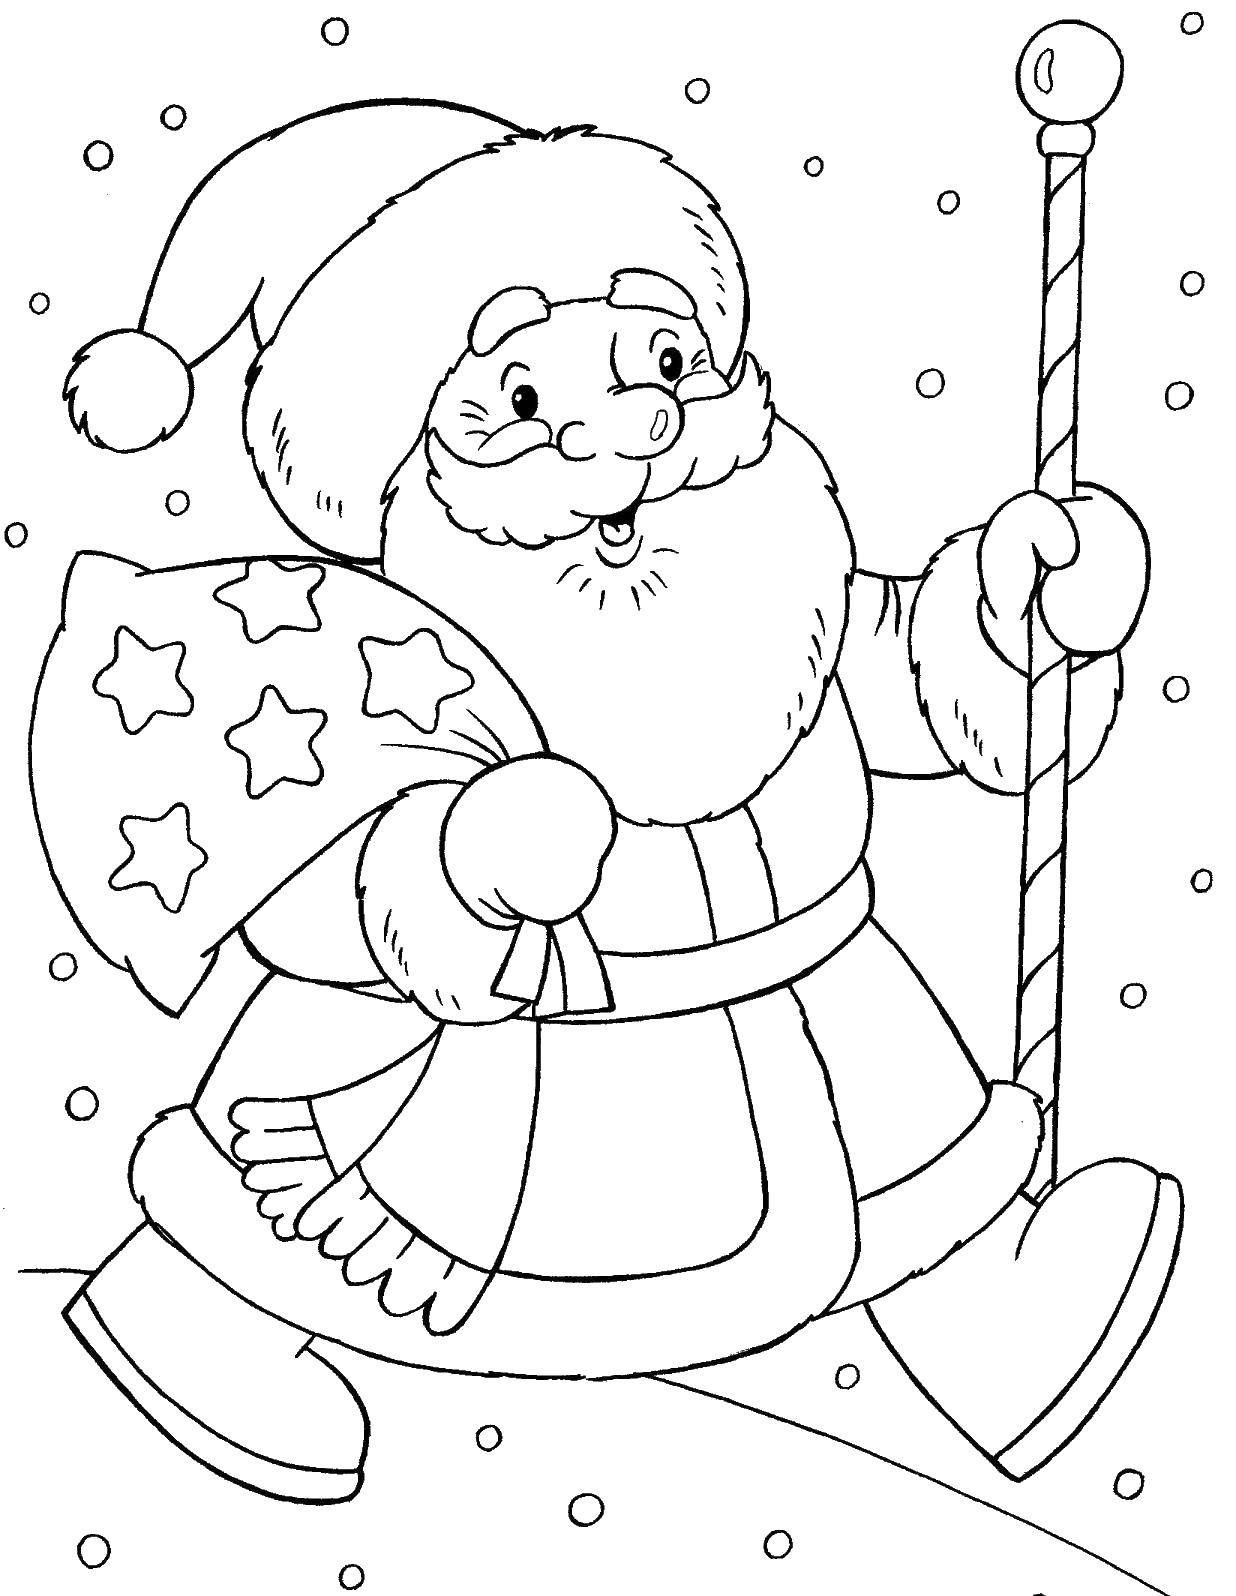 Coloring Santa Claus with stick and bag of gifts. Category Santa Claus. Tags:  Santa Claus, sled.